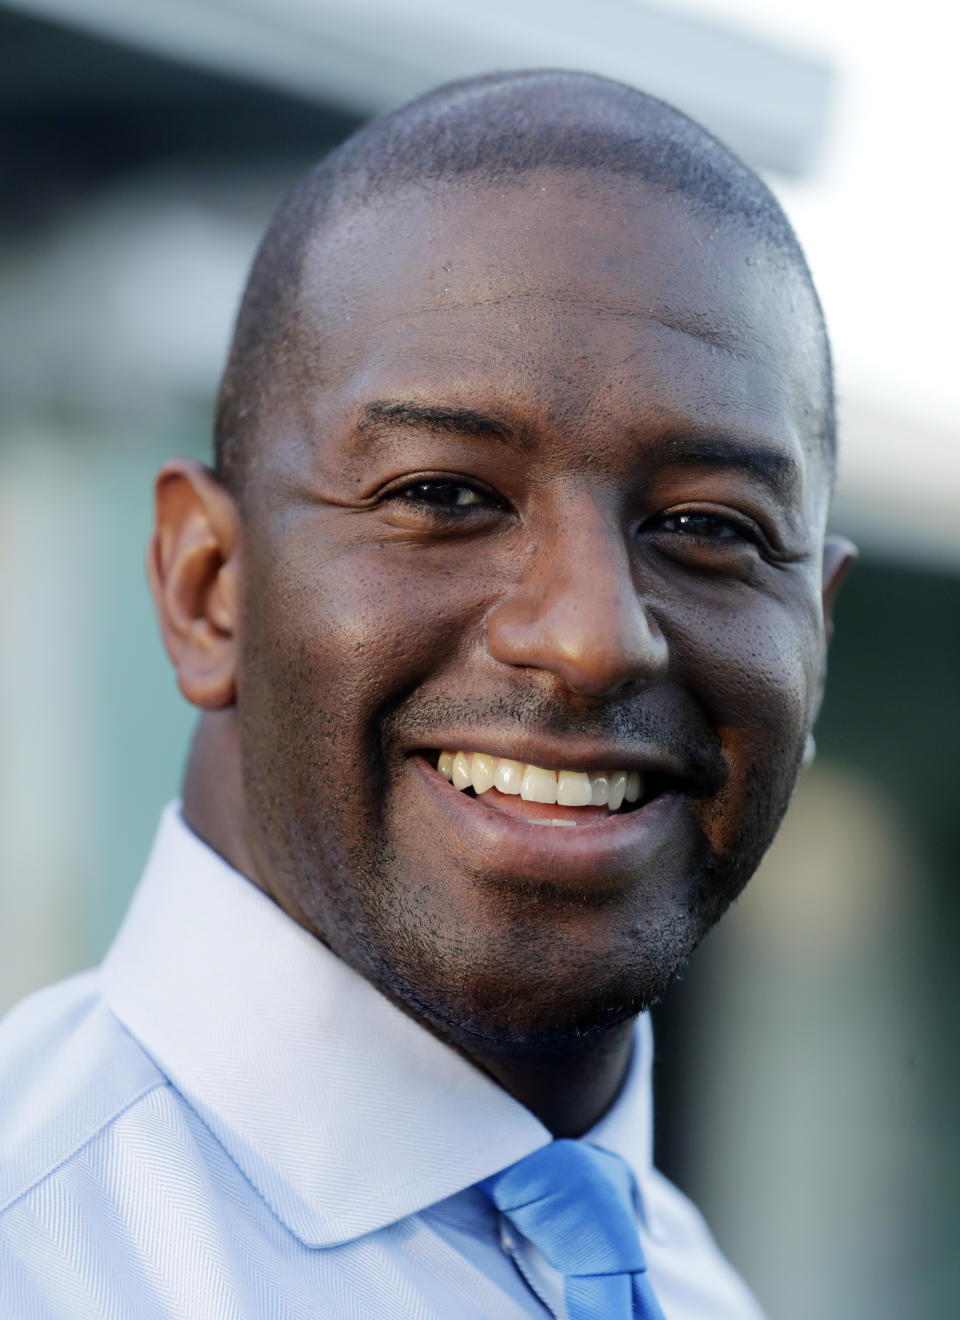 In this Aug. 13, 2018 photo, Democratic gubernatorial nominee Andrew Gillum, is interviewed in Miami. Gillum defeated former U.S. Rep. Gwen Graham and four other candidates. Republicans are taking aim at his tenure as mayor of Tallahassee, including an ongoing FBI investigation into City Hall, that Gillum claims he is not a target. Gallium will face GOP nominee Congressman Ron DeSantis. (AP Photo/Lynne Sladky)